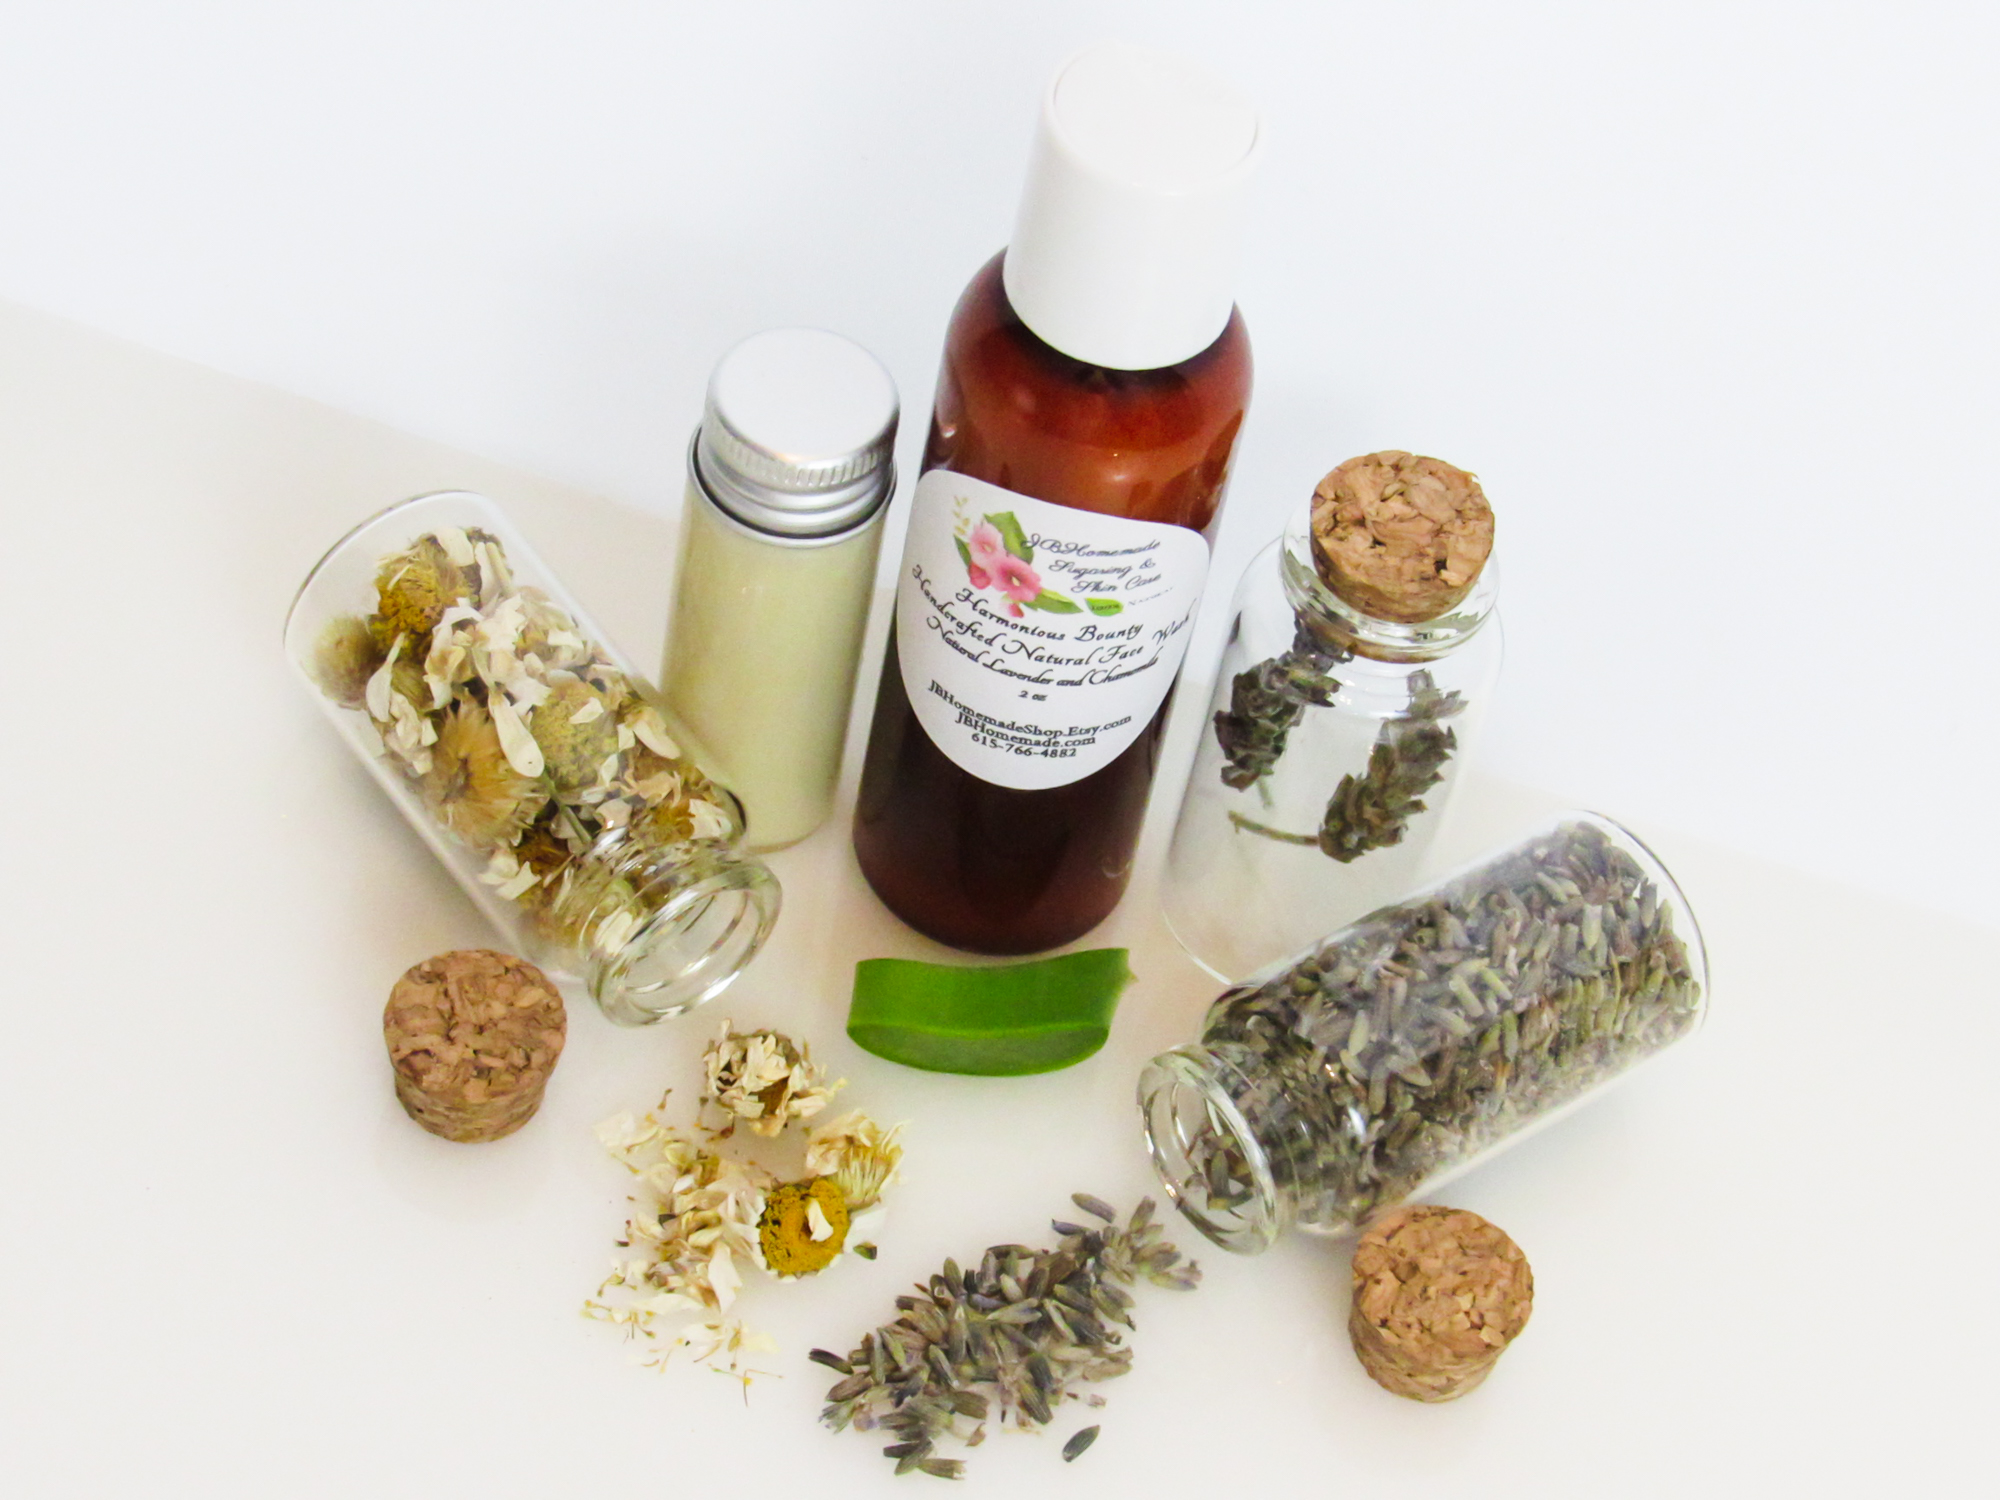 An angled, top view of an all-natural facial cleanser in an amber bottle surrounded by small, corked glass bottles containing Lavender, Aloe Vera and Chamomile ingredients and sprinkles of the same. A clear glass bottle showcases the face wash's color and texture.